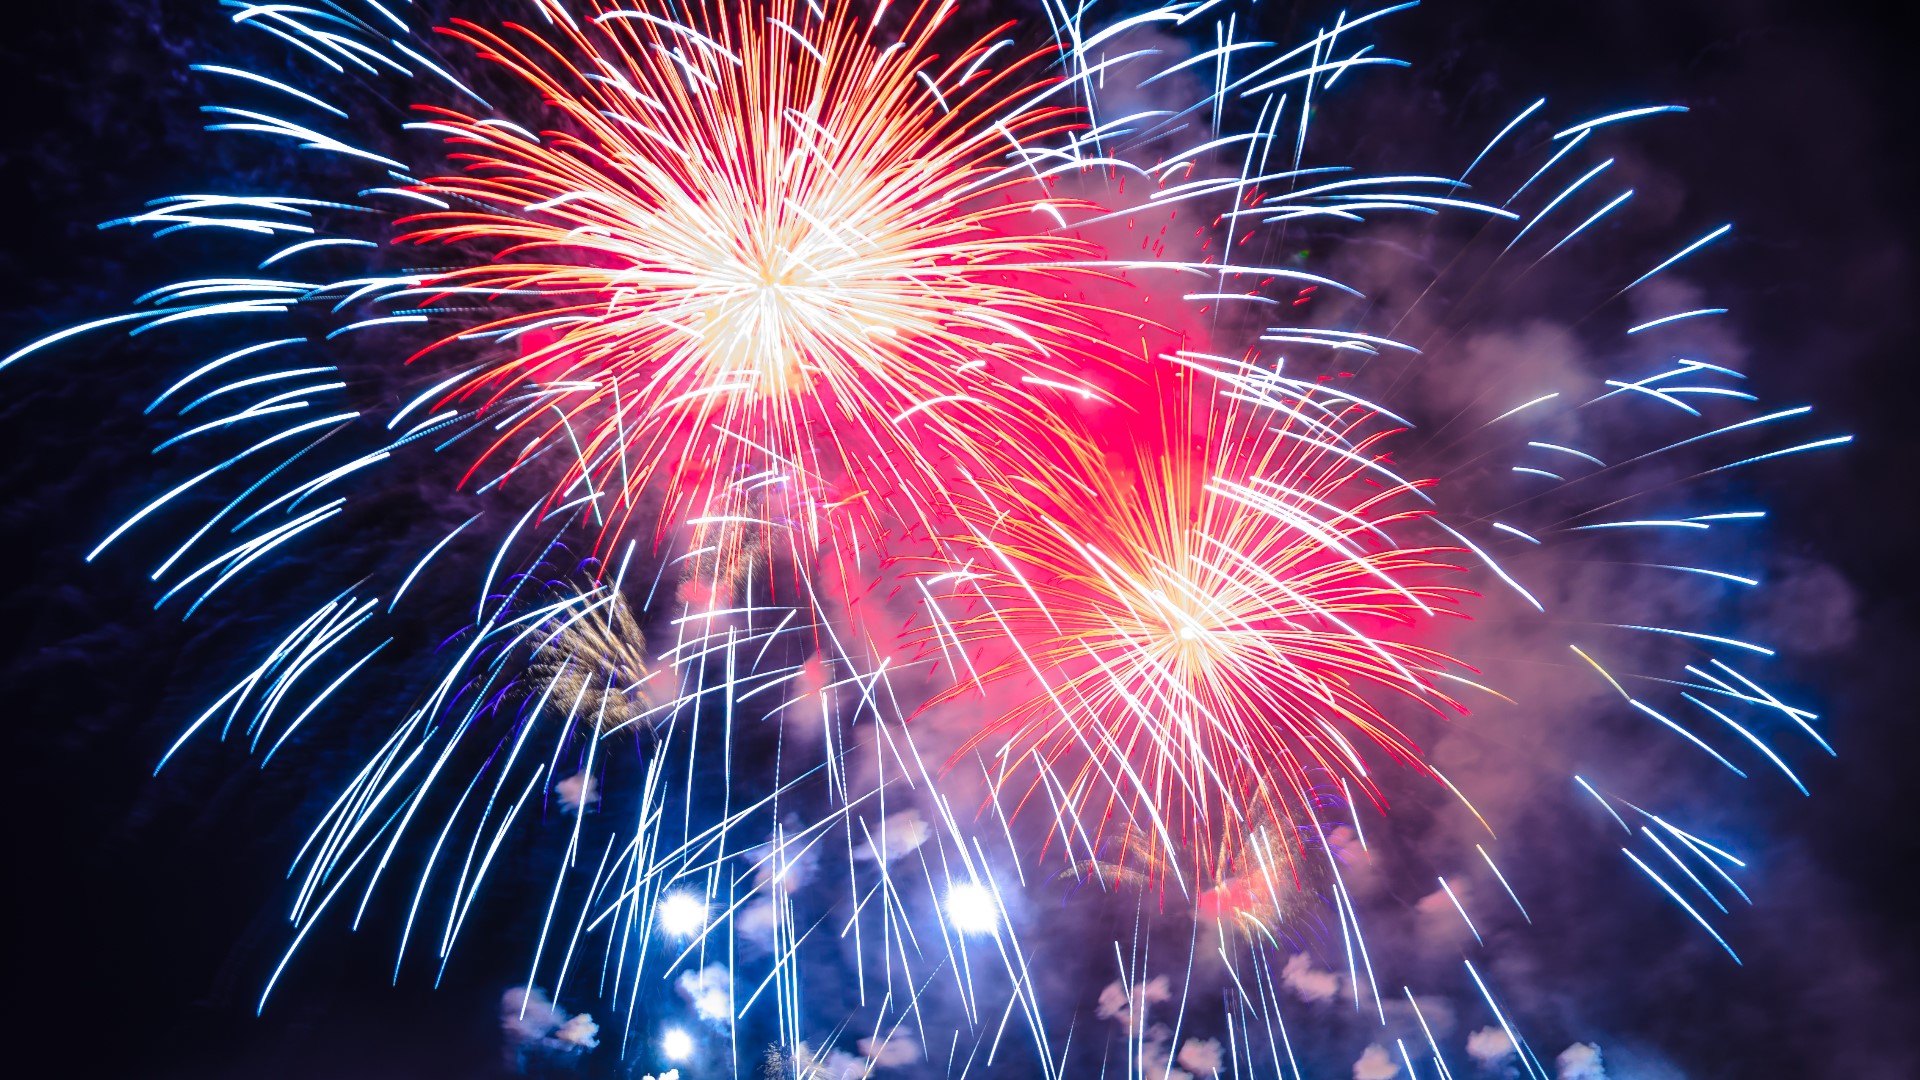 The Fourth of July is nearly here, and many may be contemplating where to watch fireworks blast into the night sky. Luckily, there are plenty of firework shows planned throughout Colorado from which to choose.